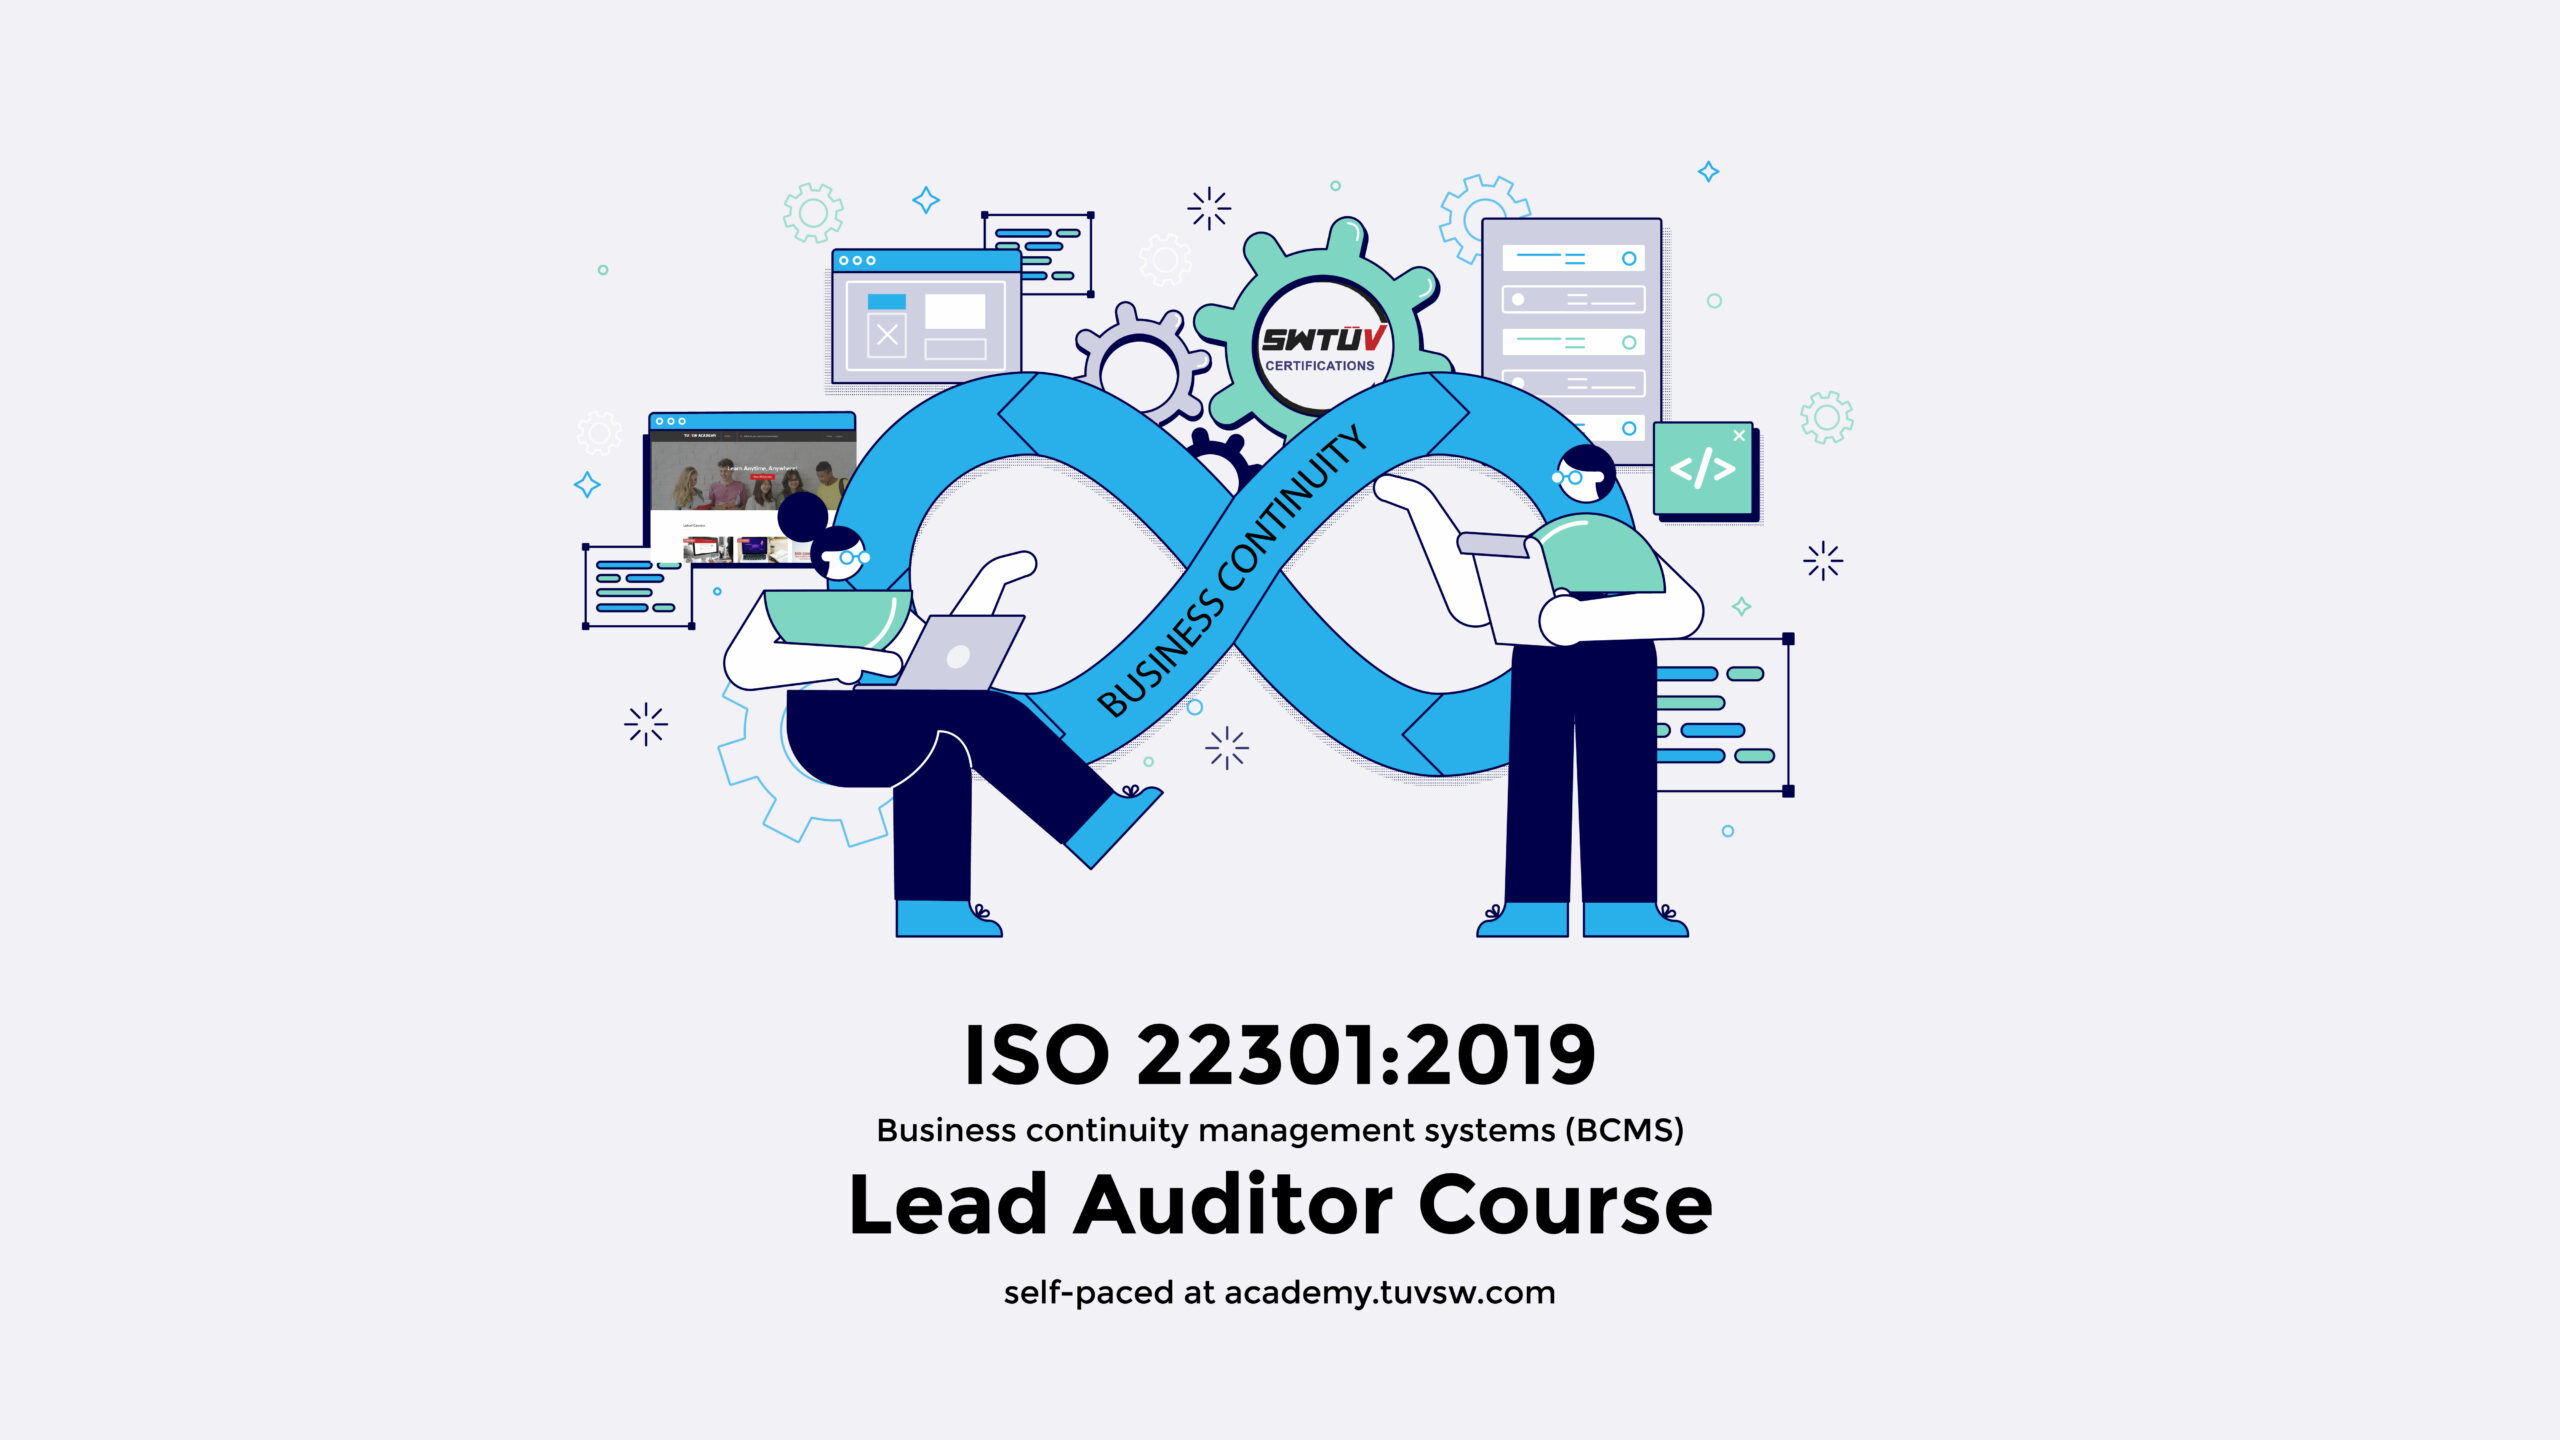 ISO 22301 2019 BCMS lead auditor training course by SWTUV-01